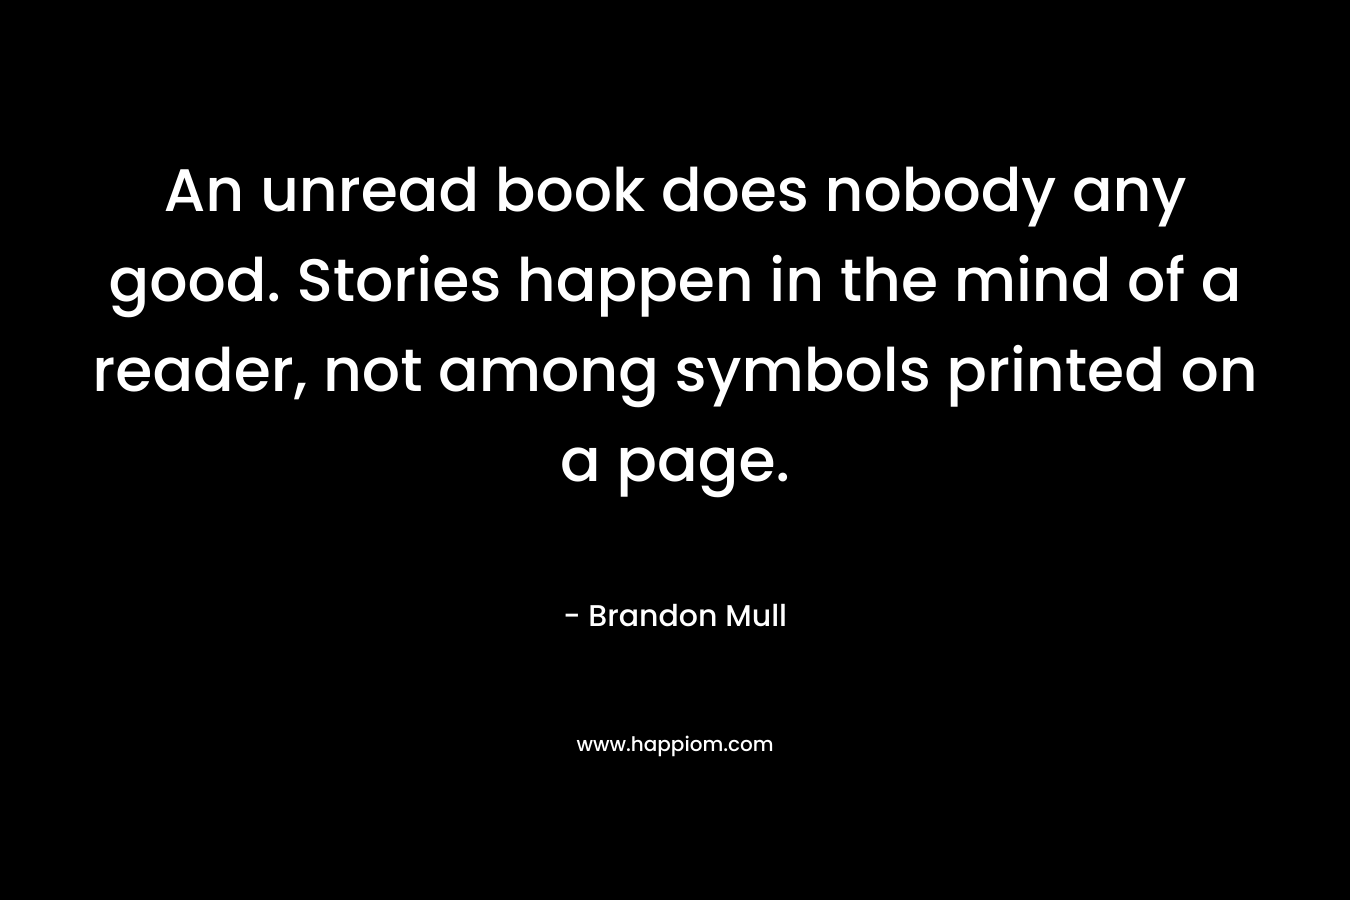 An unread book does nobody any good. Stories happen in the mind of a reader, not among symbols printed on a page. – Brandon Mull